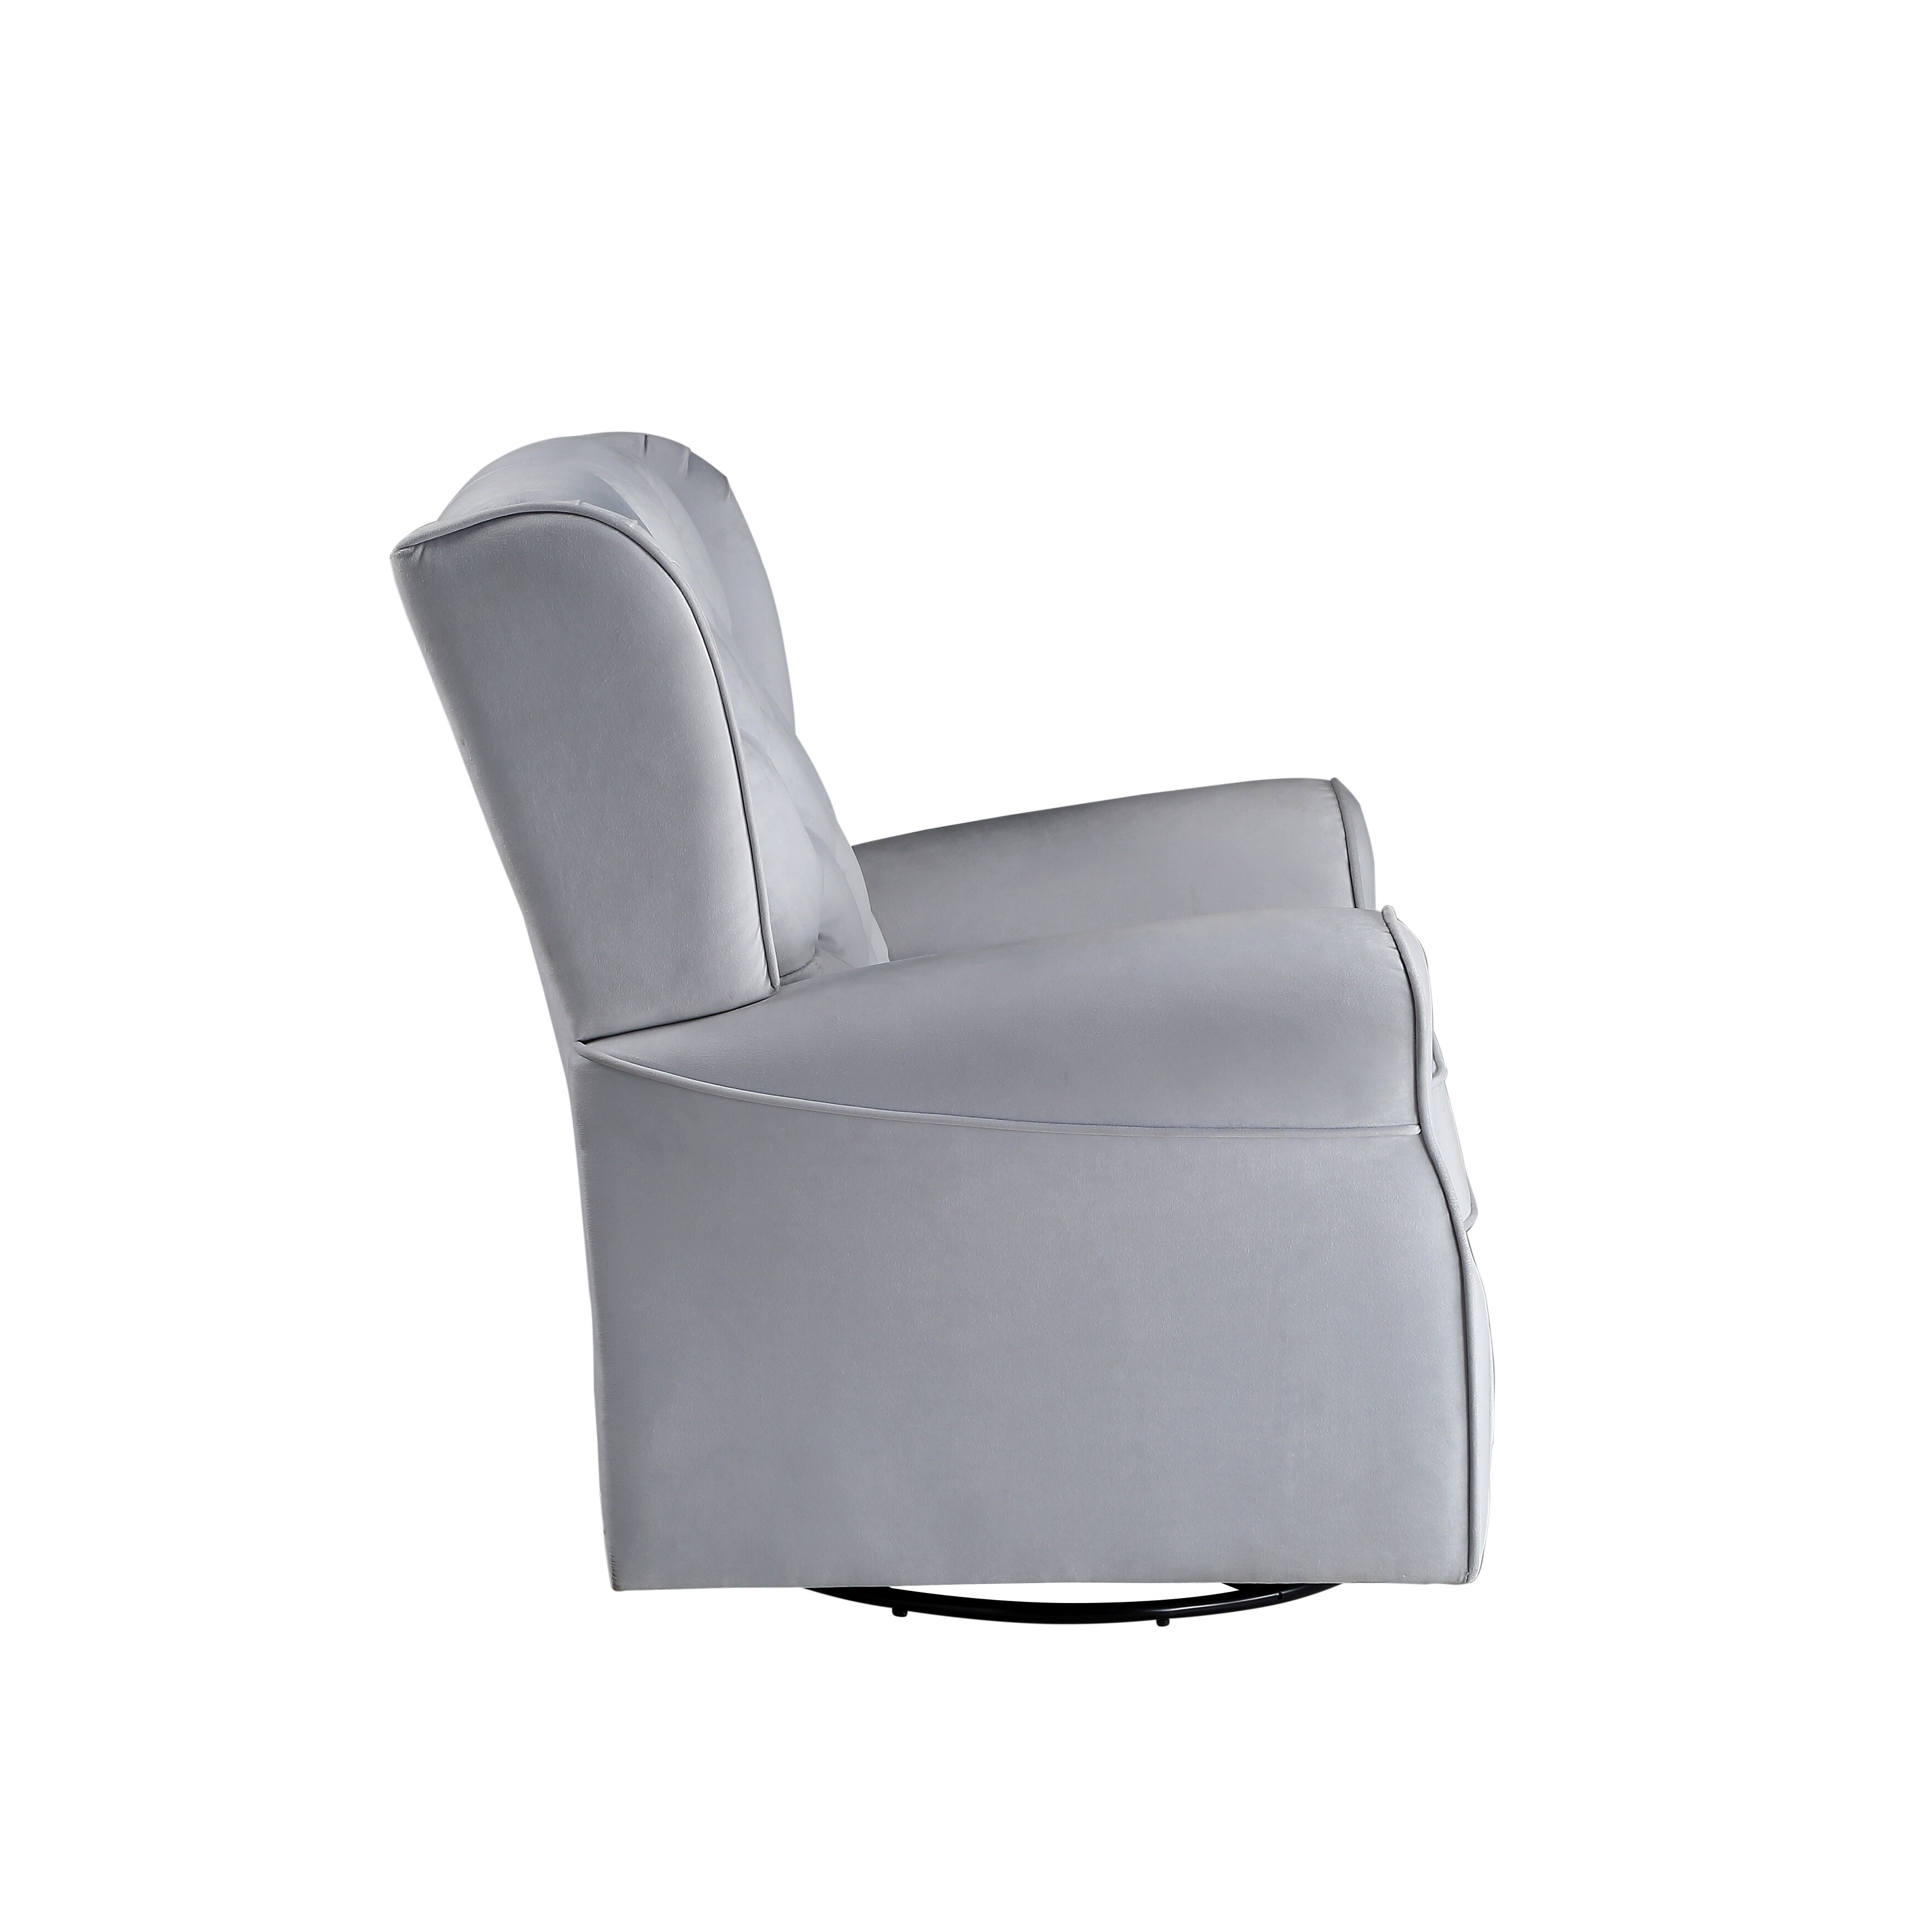 Swivel Chair Removable Cushion Cover and Button Tufted on Back Cushion Recliners